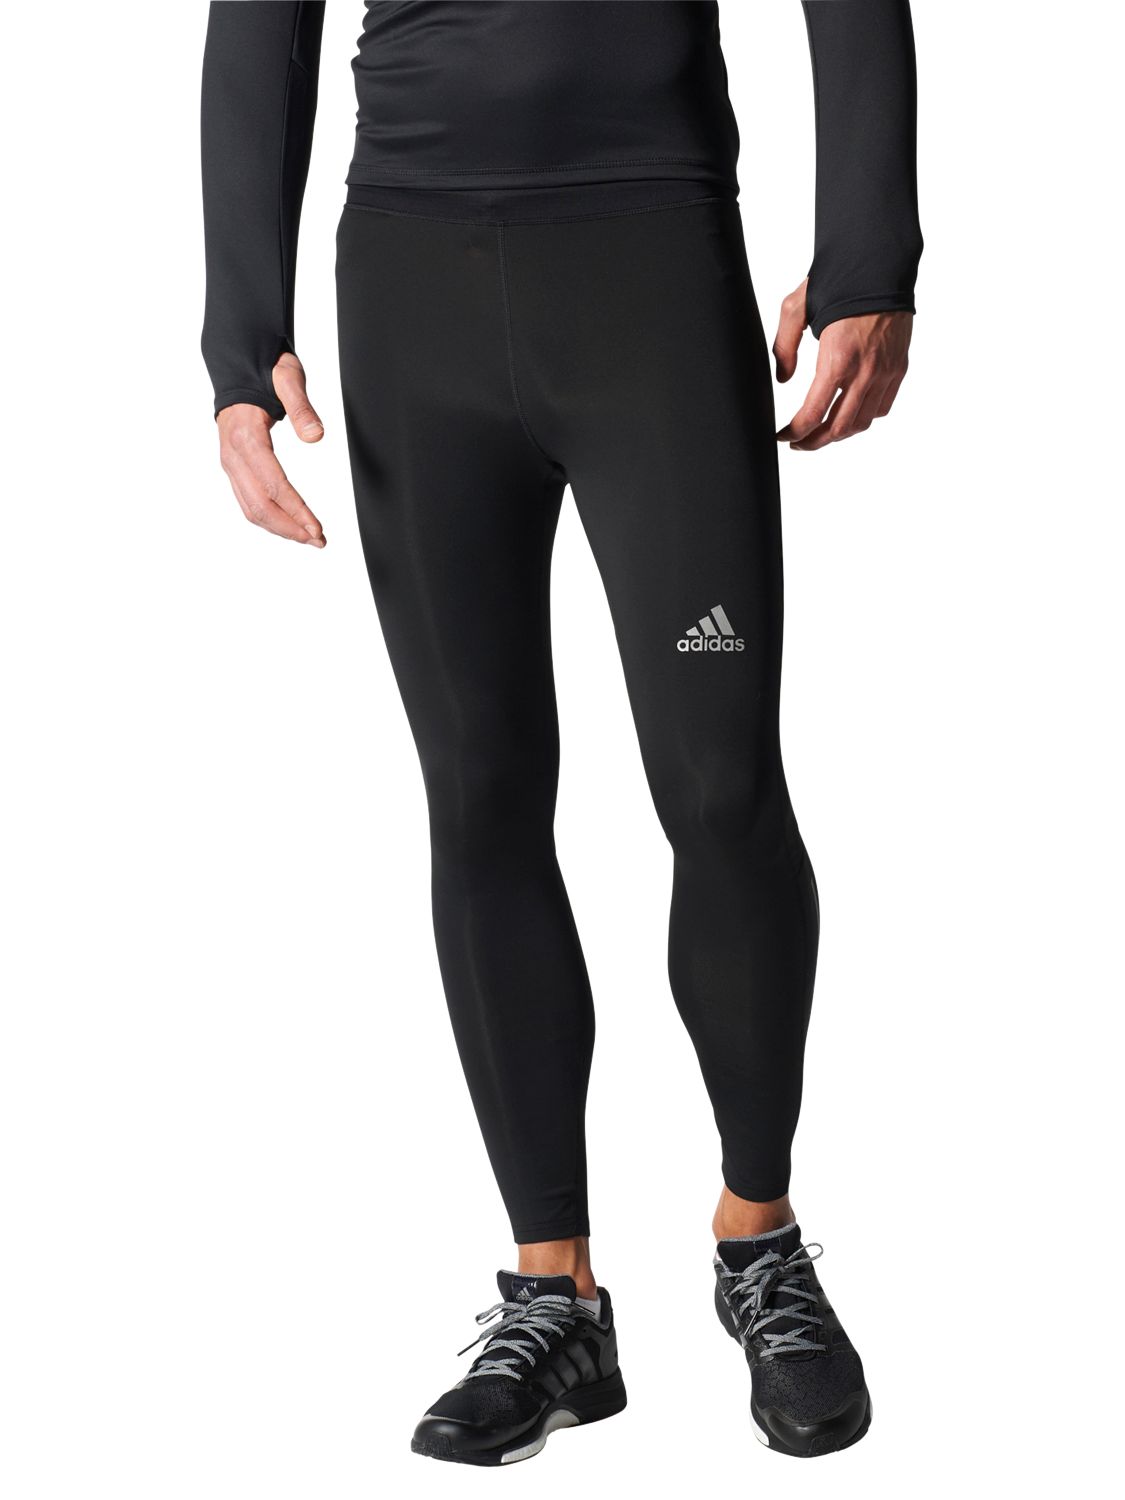 sequencials climacool running tights